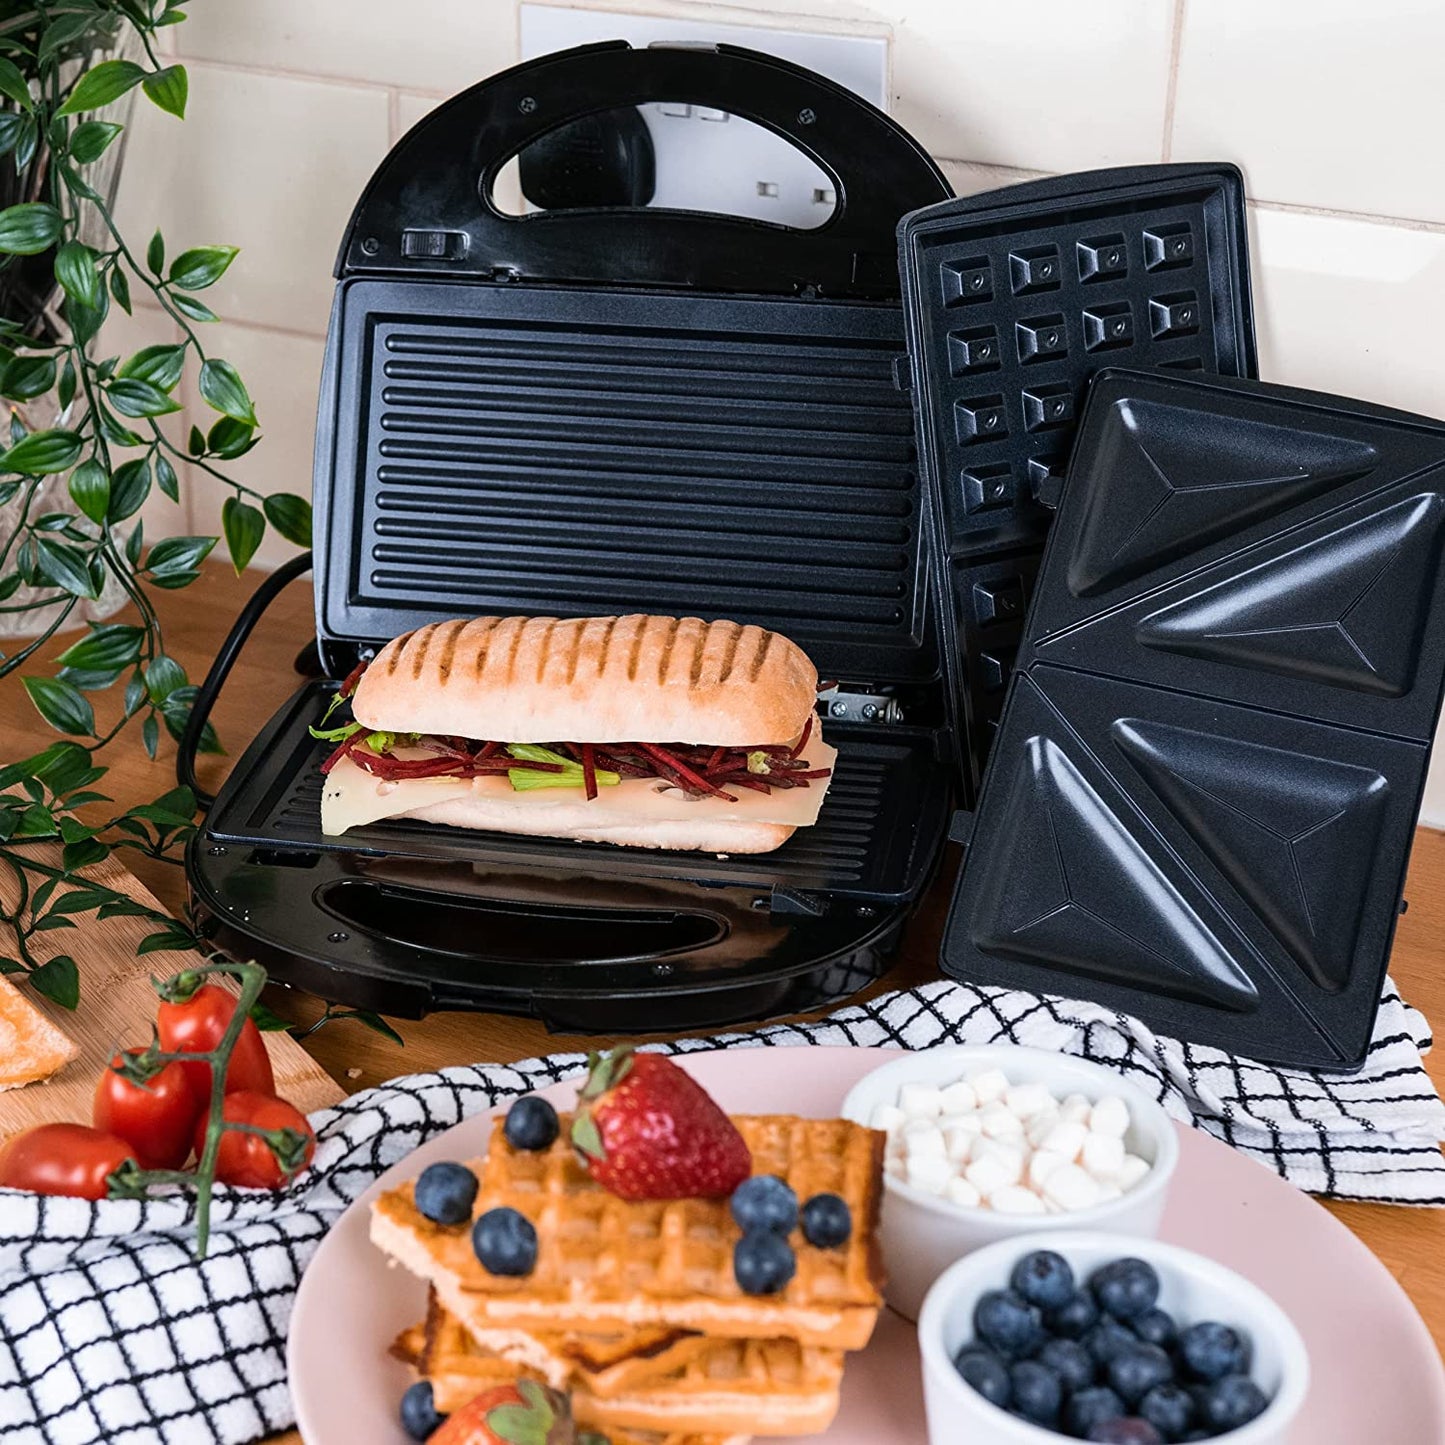 Domestic King 3 in 1 Electric Sandwich Toaster, Panini Press Grill and Waffle Maker  (DK18025)